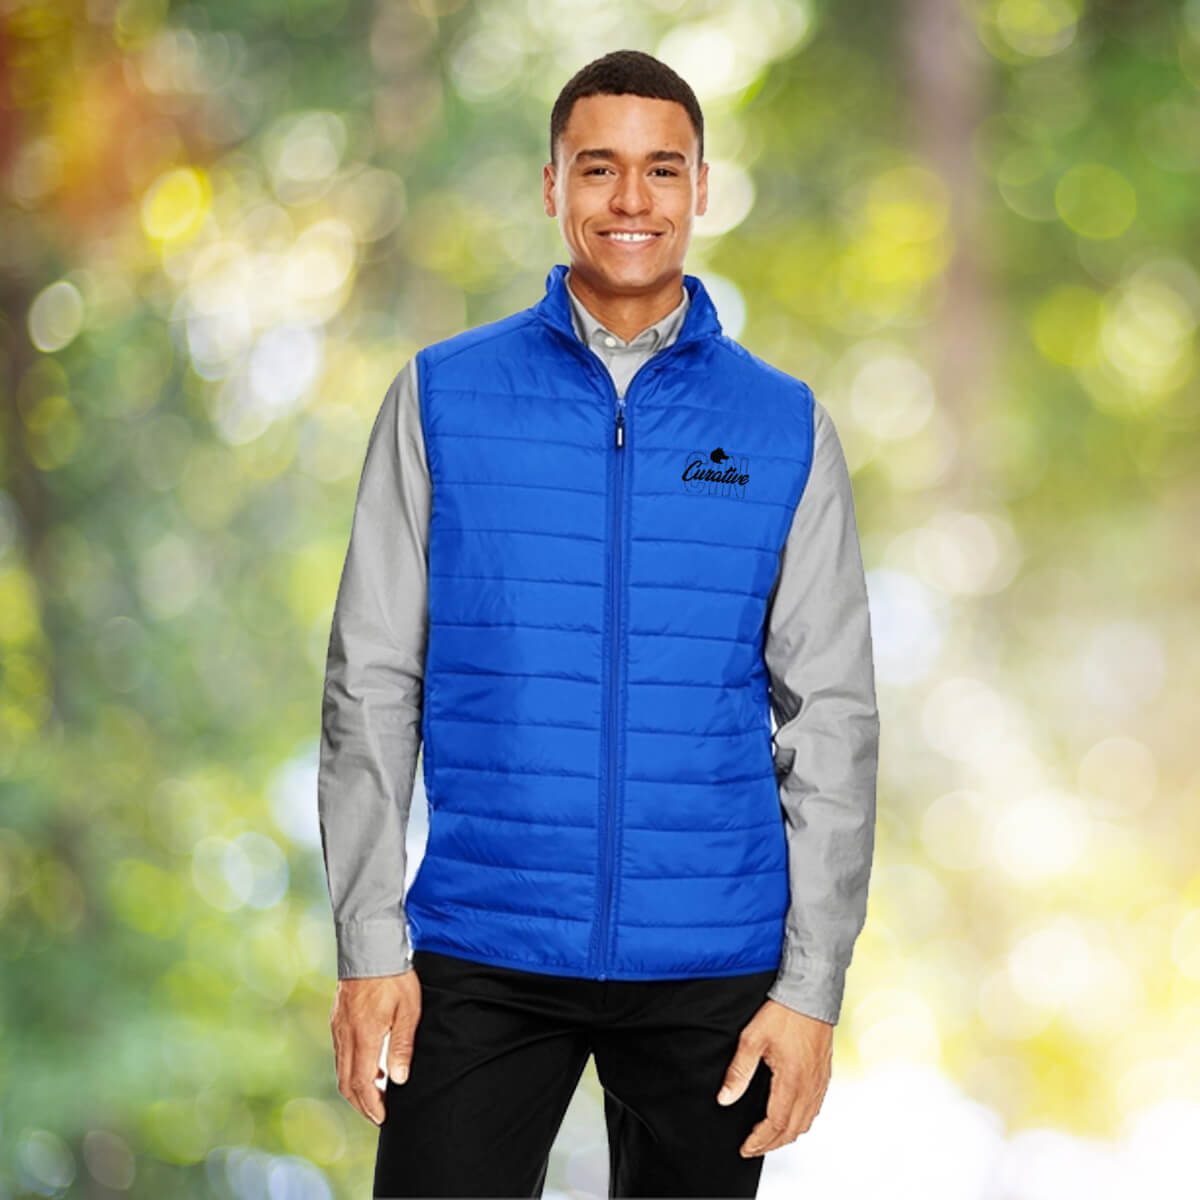 Man outdoors wearing blue vest outerwear apparel with black curative printing logo imprint